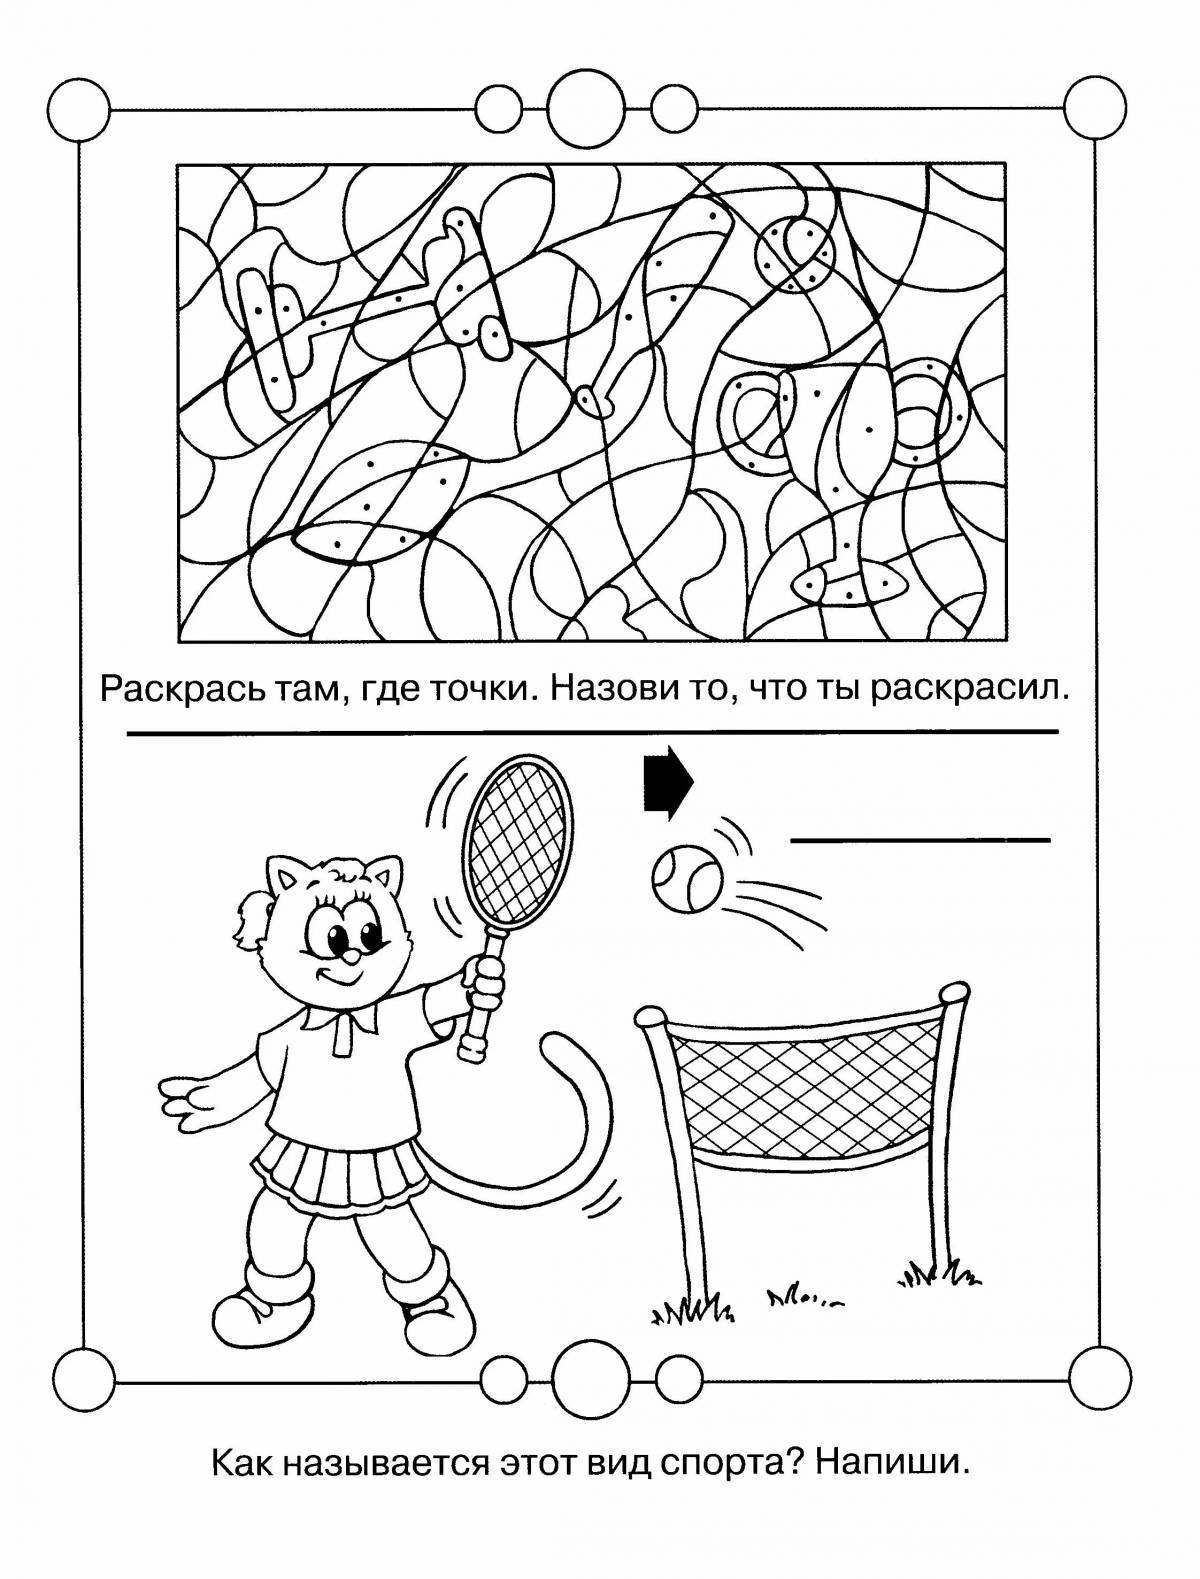 Creative coloring puzzle for kids